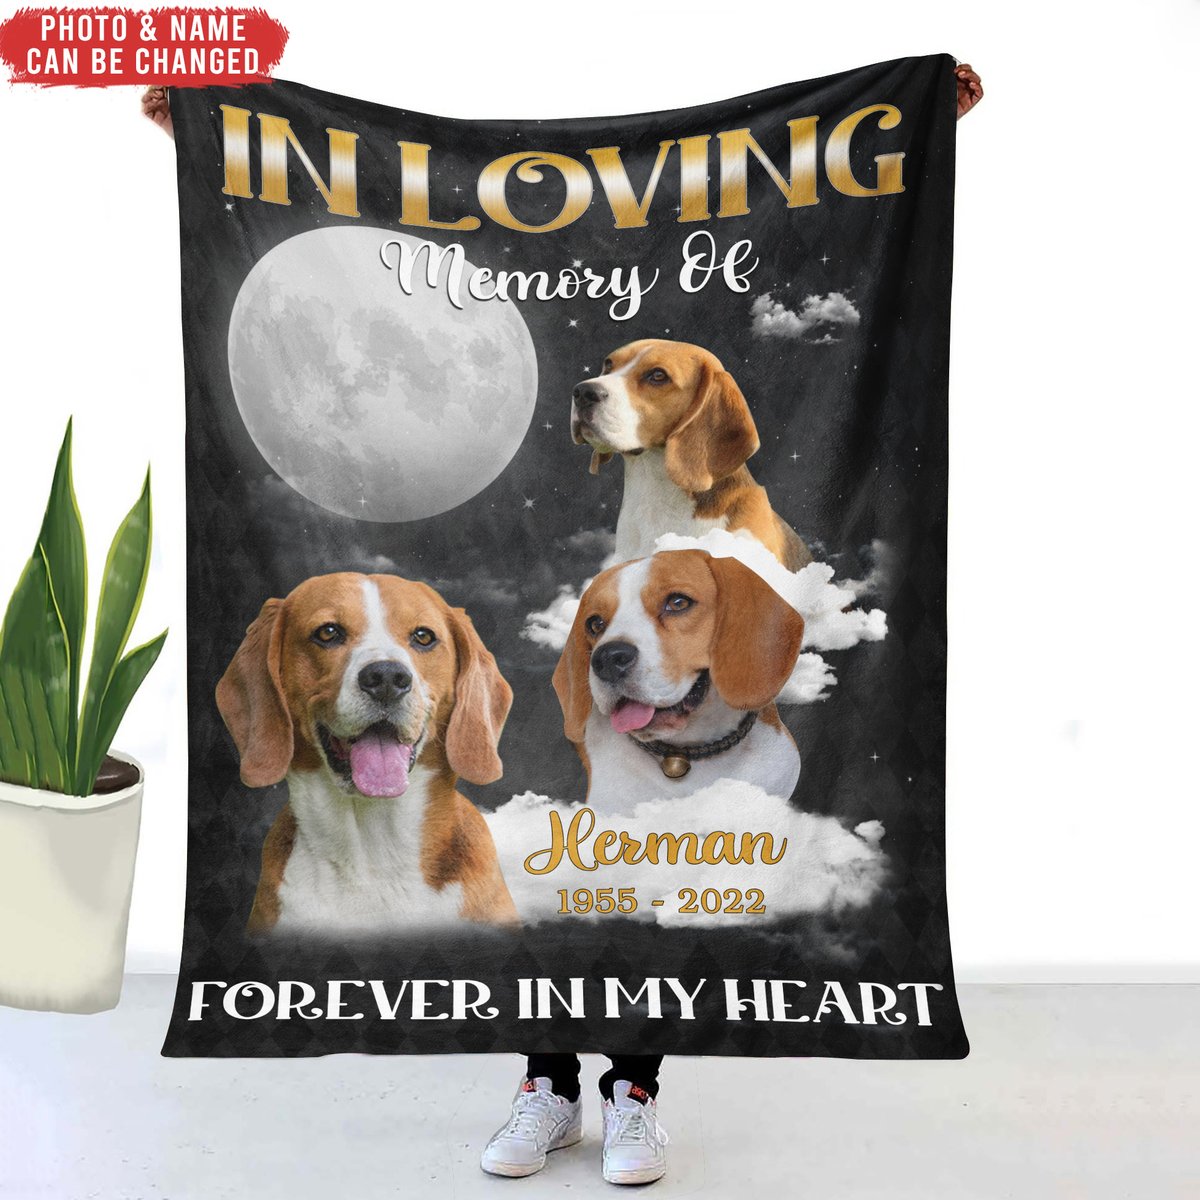 Wrap yourself in the warmth of cherished memories with our memorial blanket. A loving tribute to keep their spirit close. Click here: customizeaf.com/BL31?utm_sourc… #MemorialBlanket